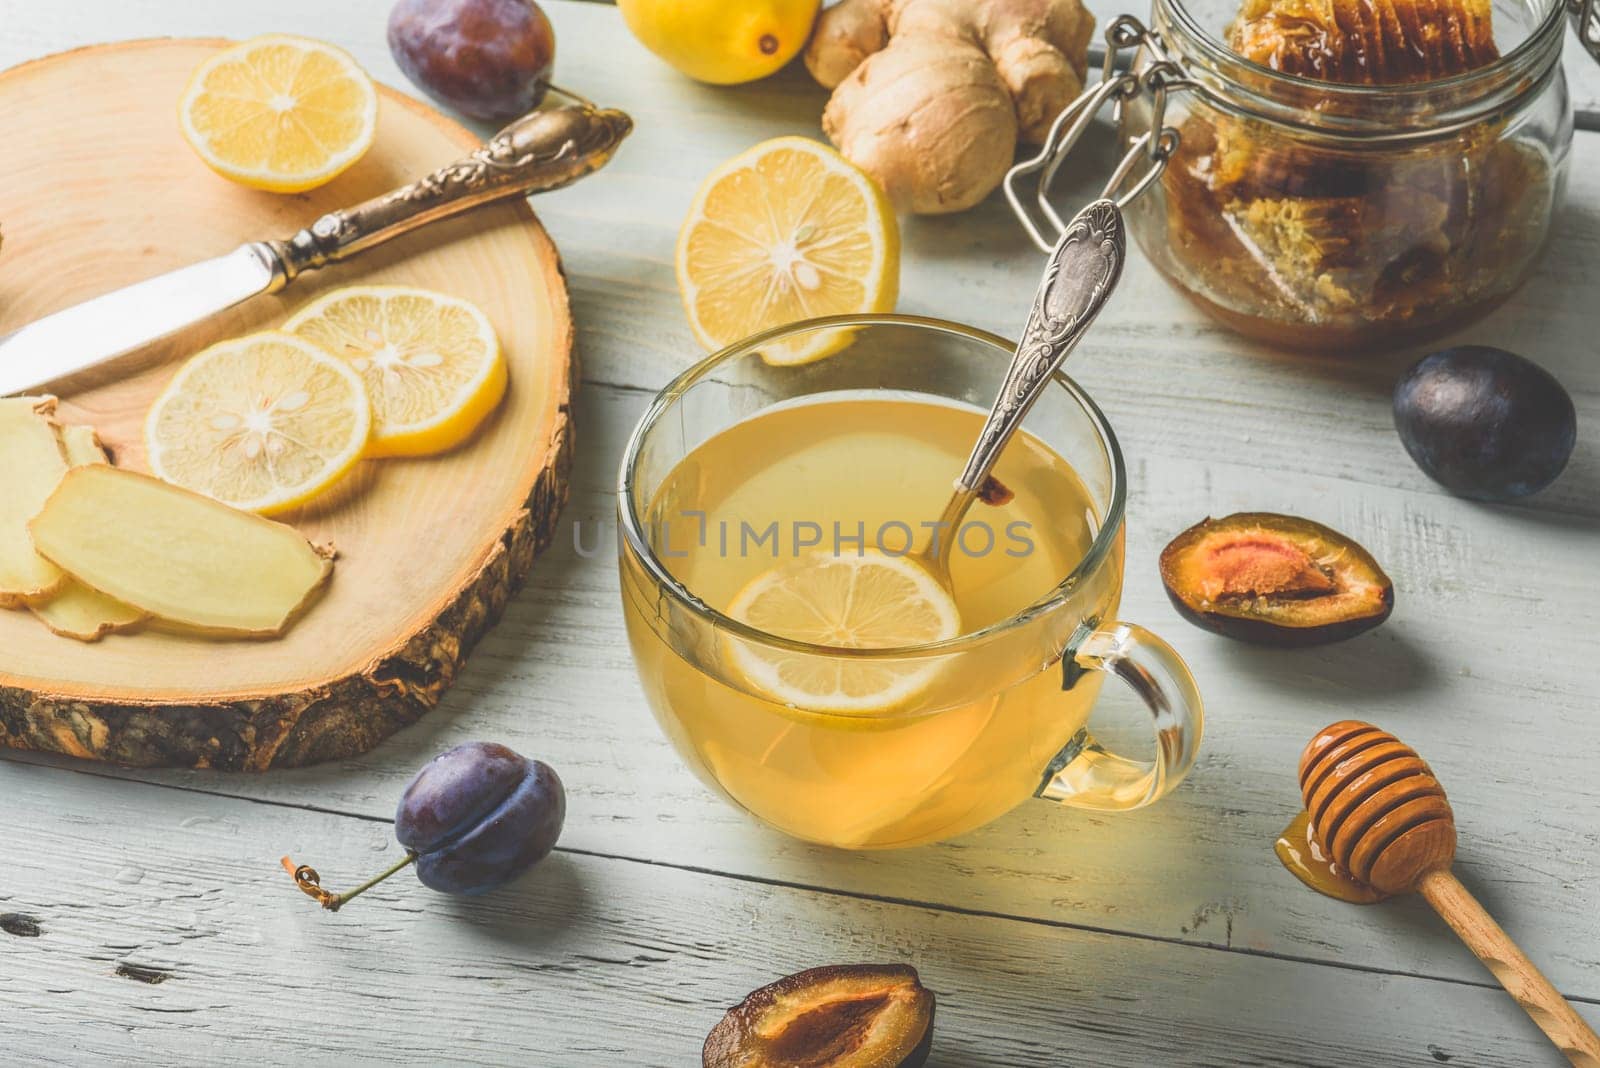 Cup of tea with lemon, honey and ginger over wooden surface by Seva_blsv